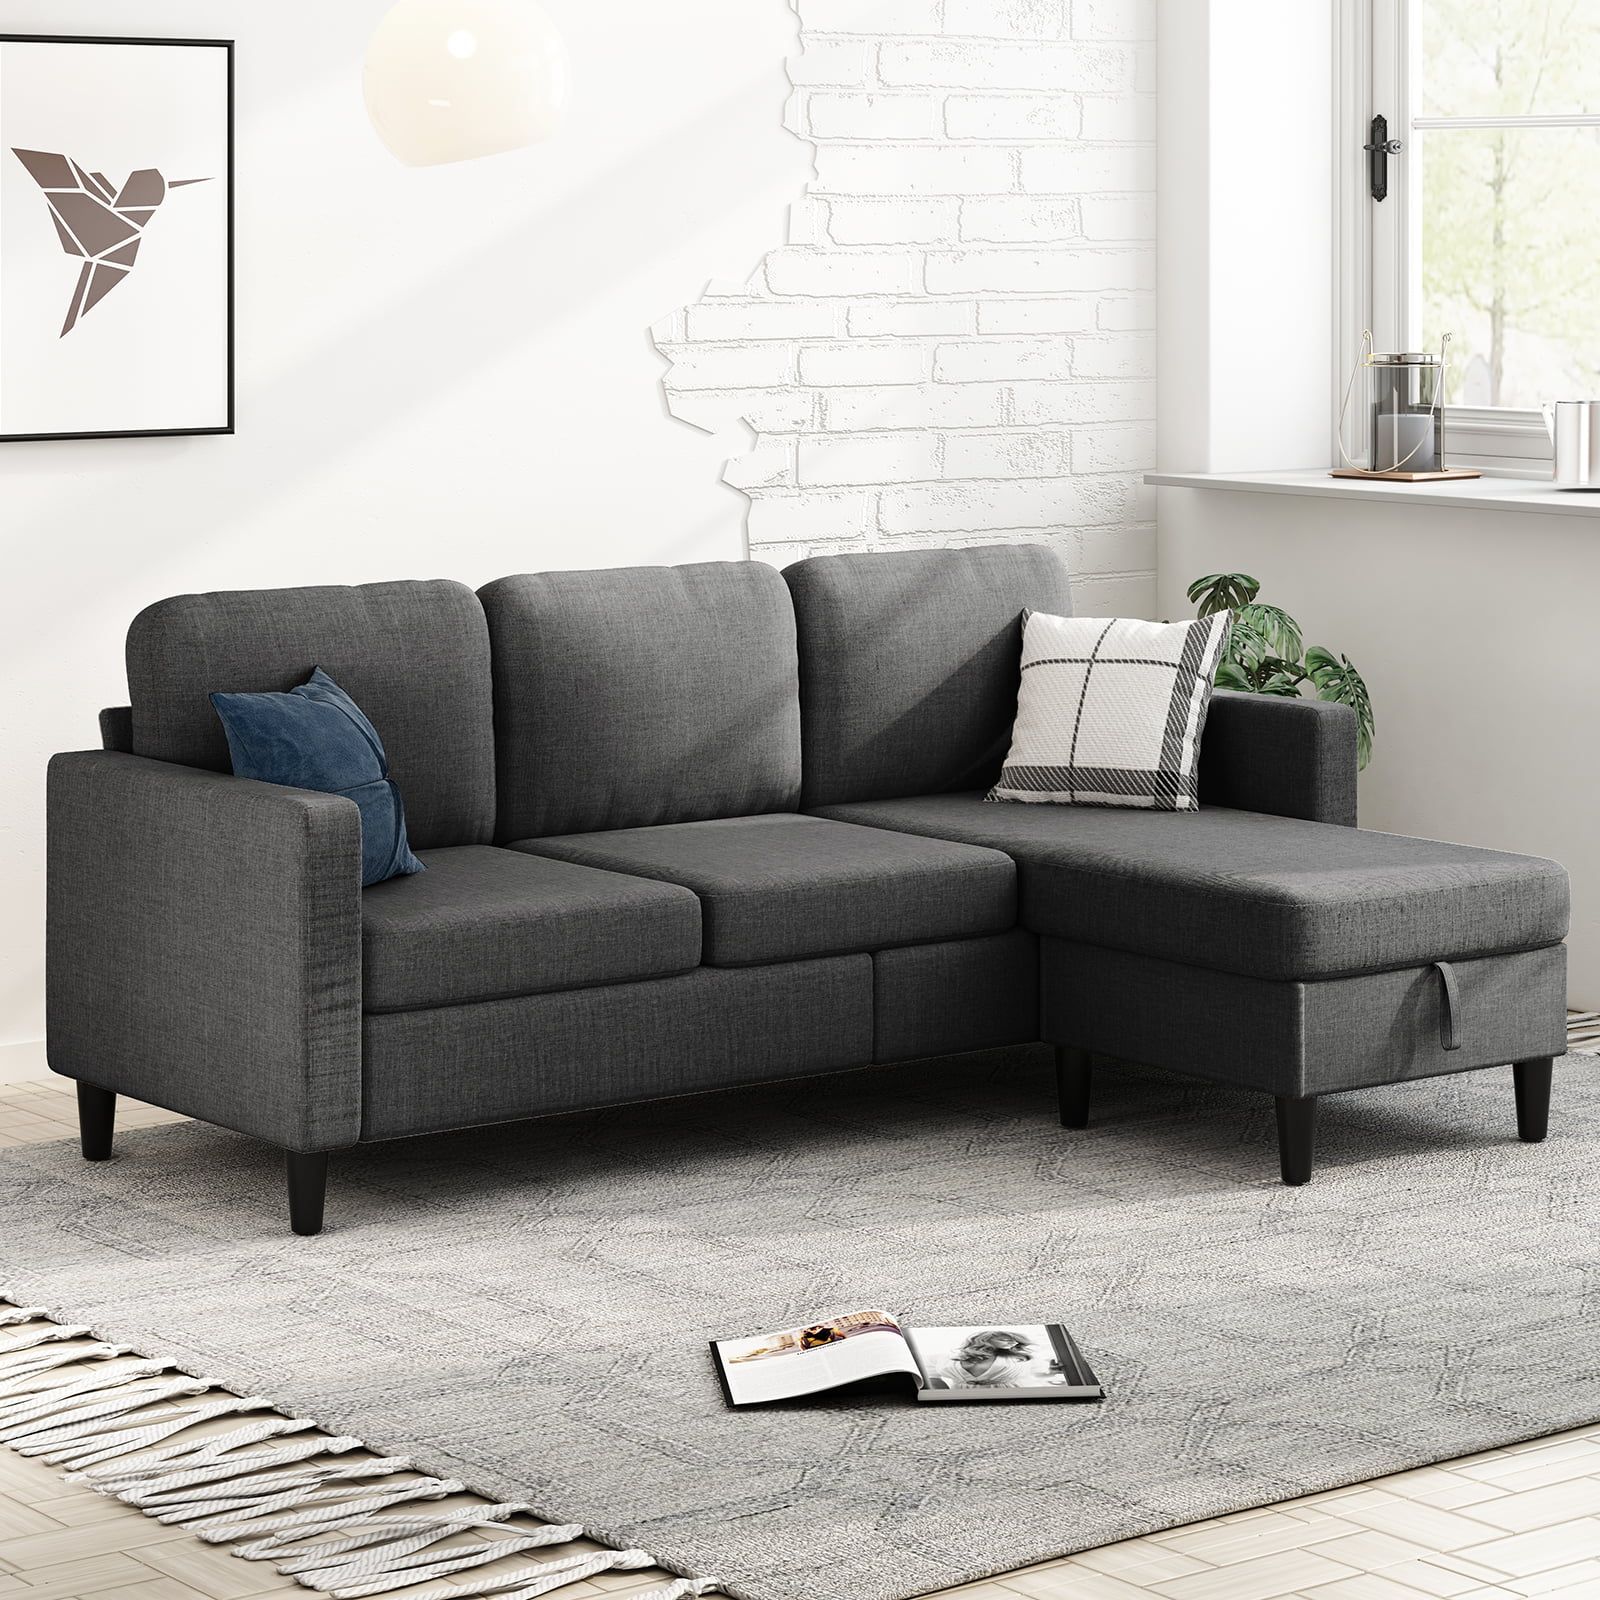 Muzz Sectional Sofa With Movable Ottoman, Free Combination Sectional Couch,  Small L Shaped Sectional Sofa With Storage Ottoman, Modern Linen Fabric Sofa  Set For Living Room (Dark Grey) – Walmart In Sofa Sectionals With Storage (View 15 of 15)